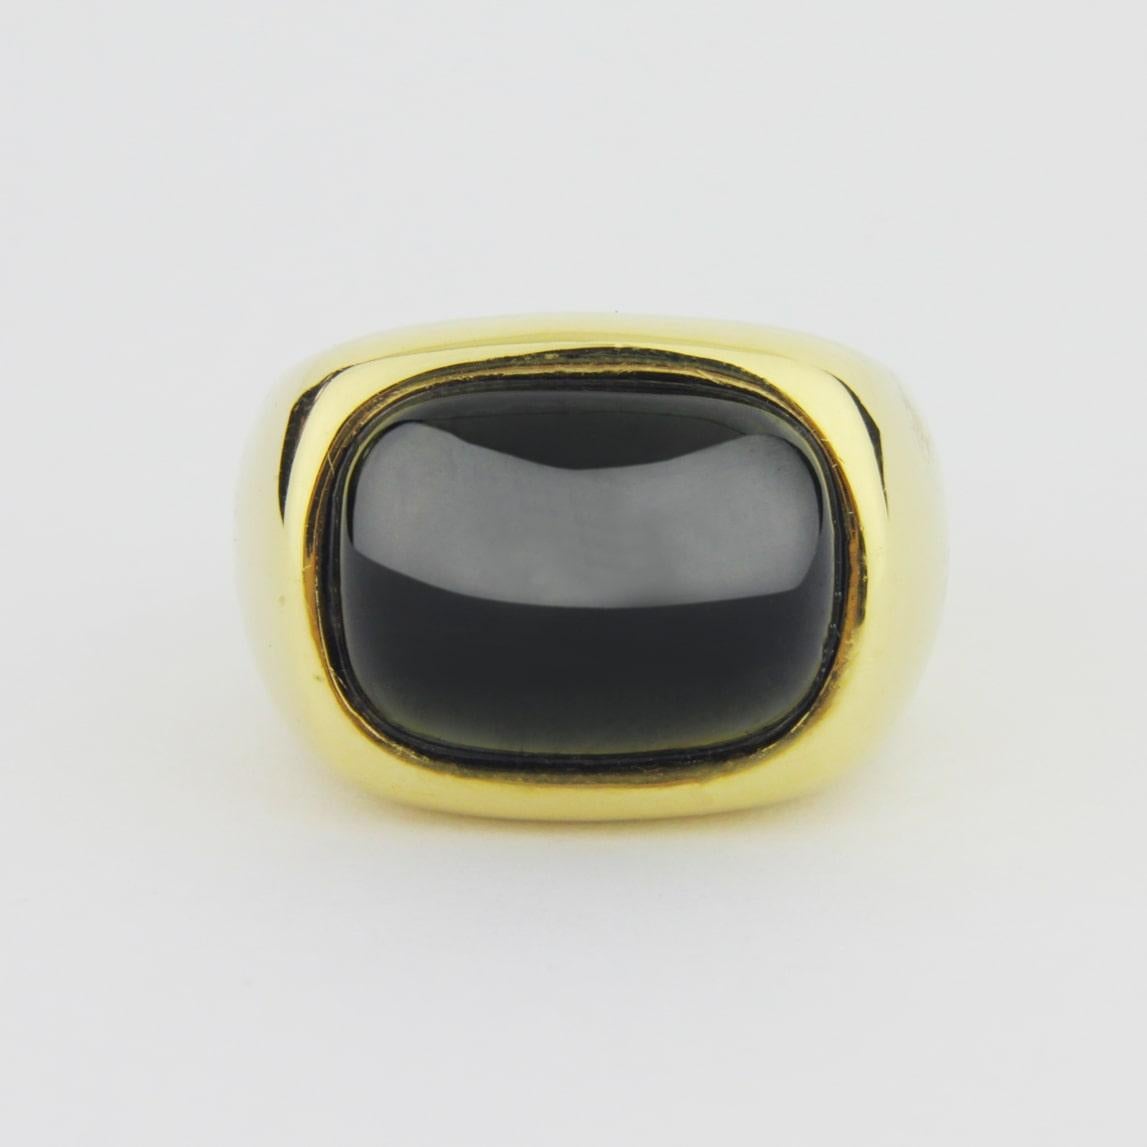 An Italian 18kt yellow gold and cabochon green tourmaline dress ring. Beautifully made, this ring features a deep green tourmaline estimated to be 10 carats in size, which has been set in a rub over style. The piece has been signed to the outside of